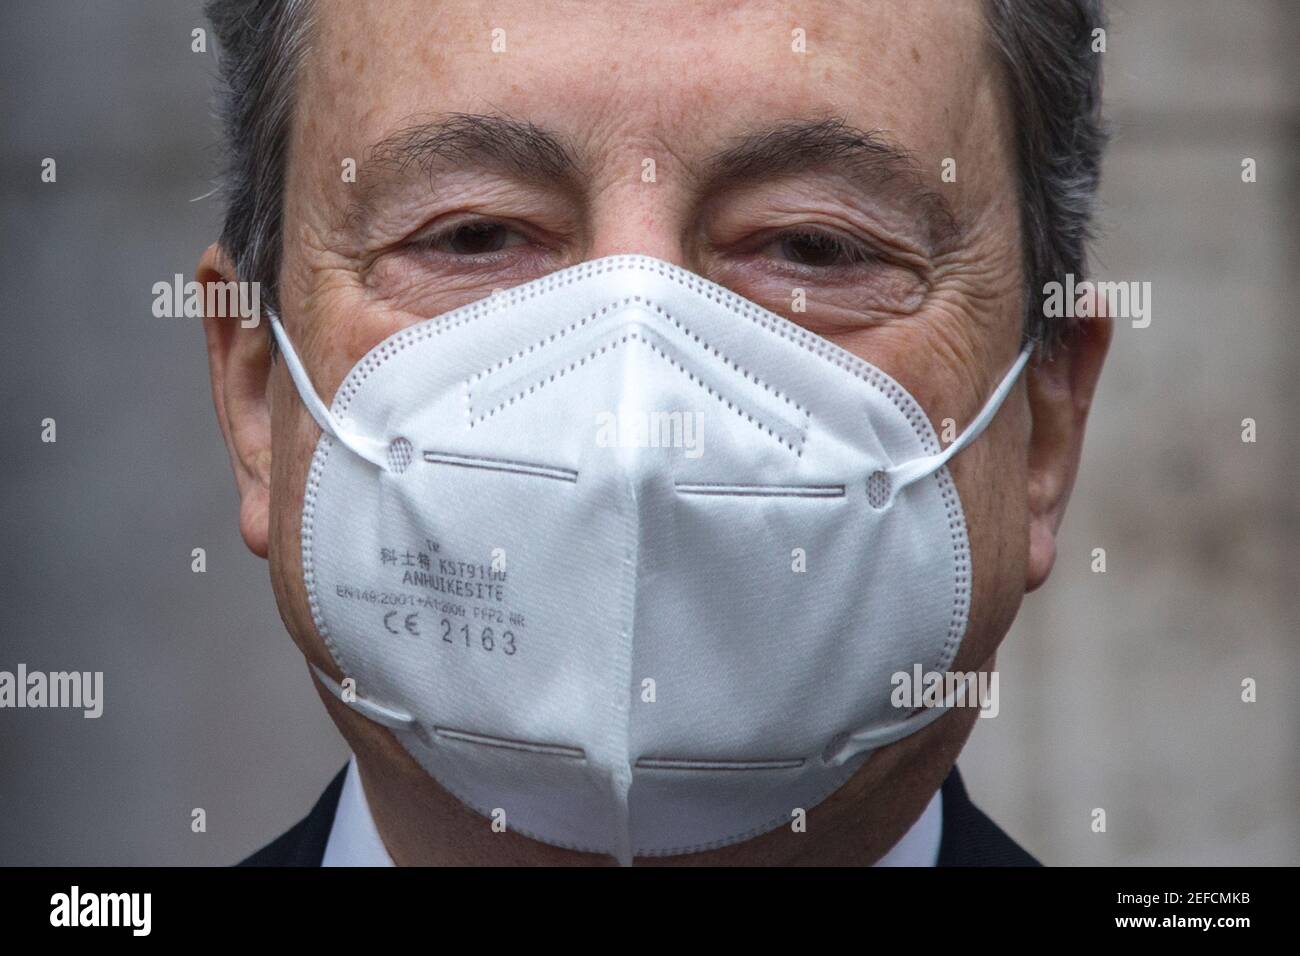 Rome, Italy. 17th Feb, 2021. The Italian Prime Minister and former President of the European Central Bank, BCE, Professor Mario Draghi, arrives at the Senate of the Italian Republic asking the Senators the vote of confidence (Voto di fiducia) for the new Italian Government. Credit: LSF Photo/Alamy Live News Stock Photo